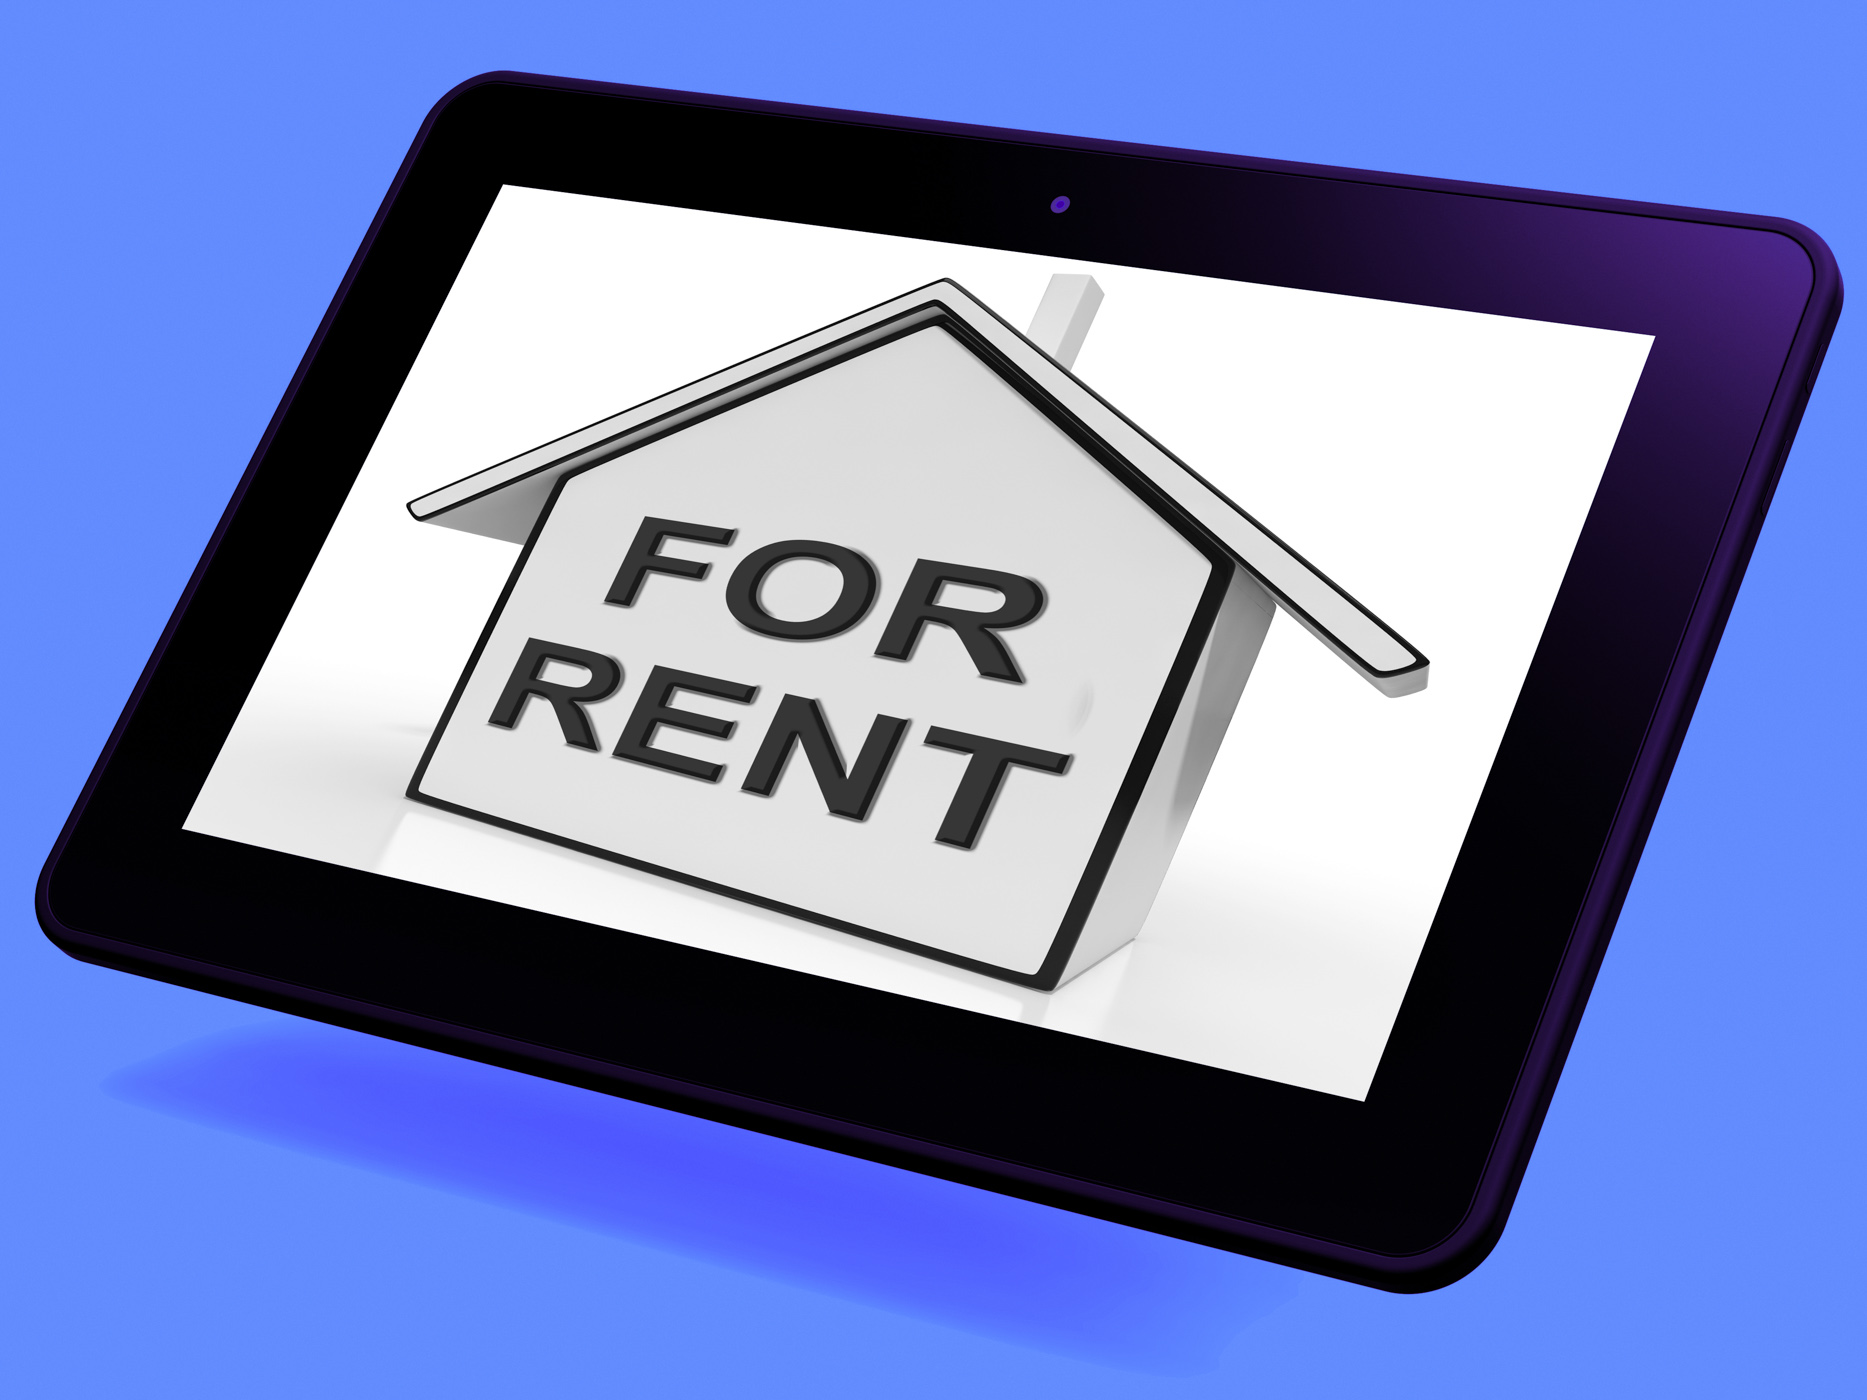 For rent house tablet means property tenancy or lease photo